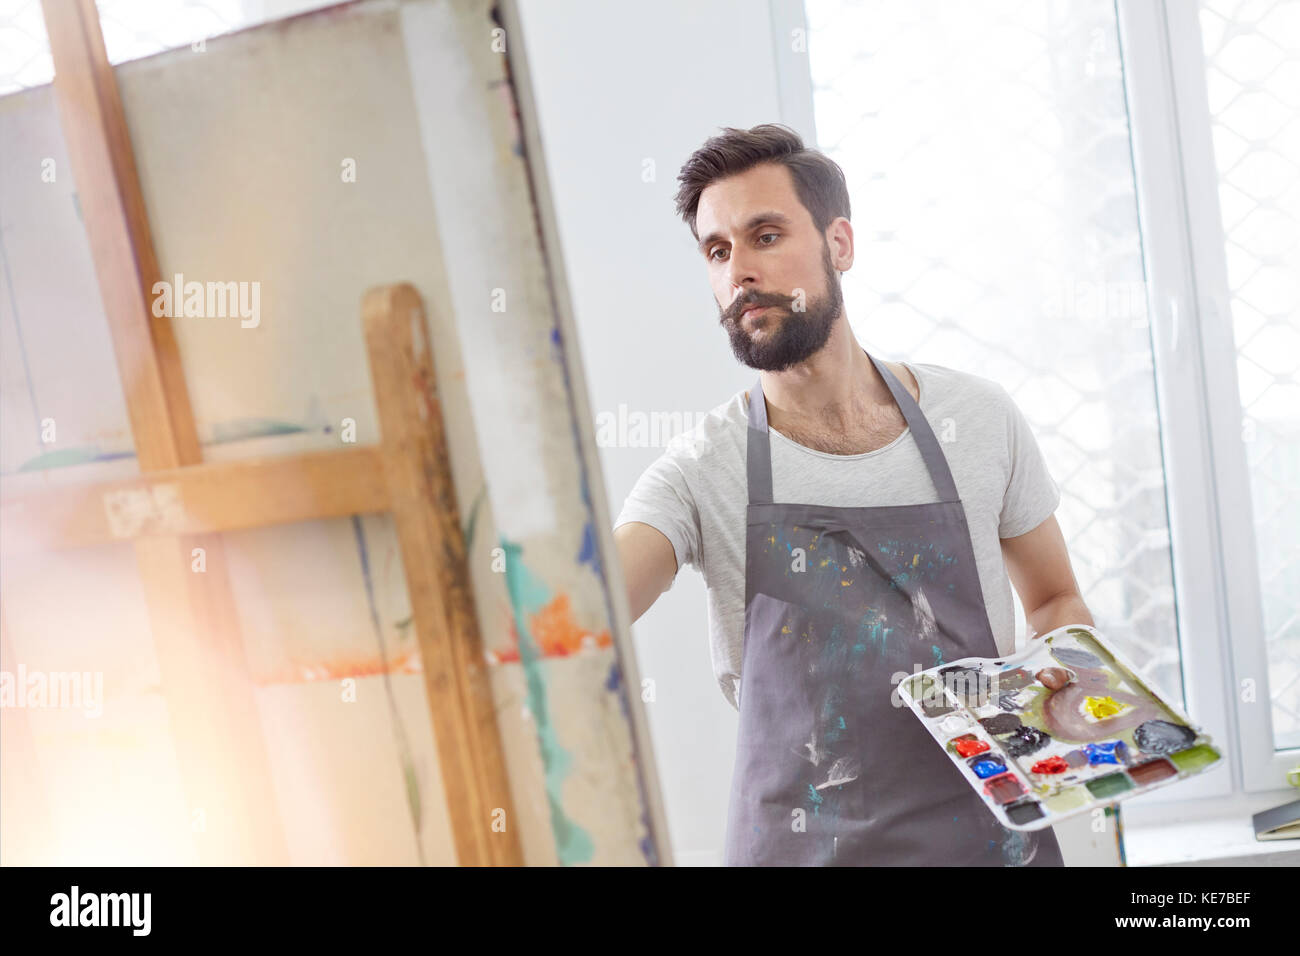 Male artist with palette painting at easel in art studio Stock Photo